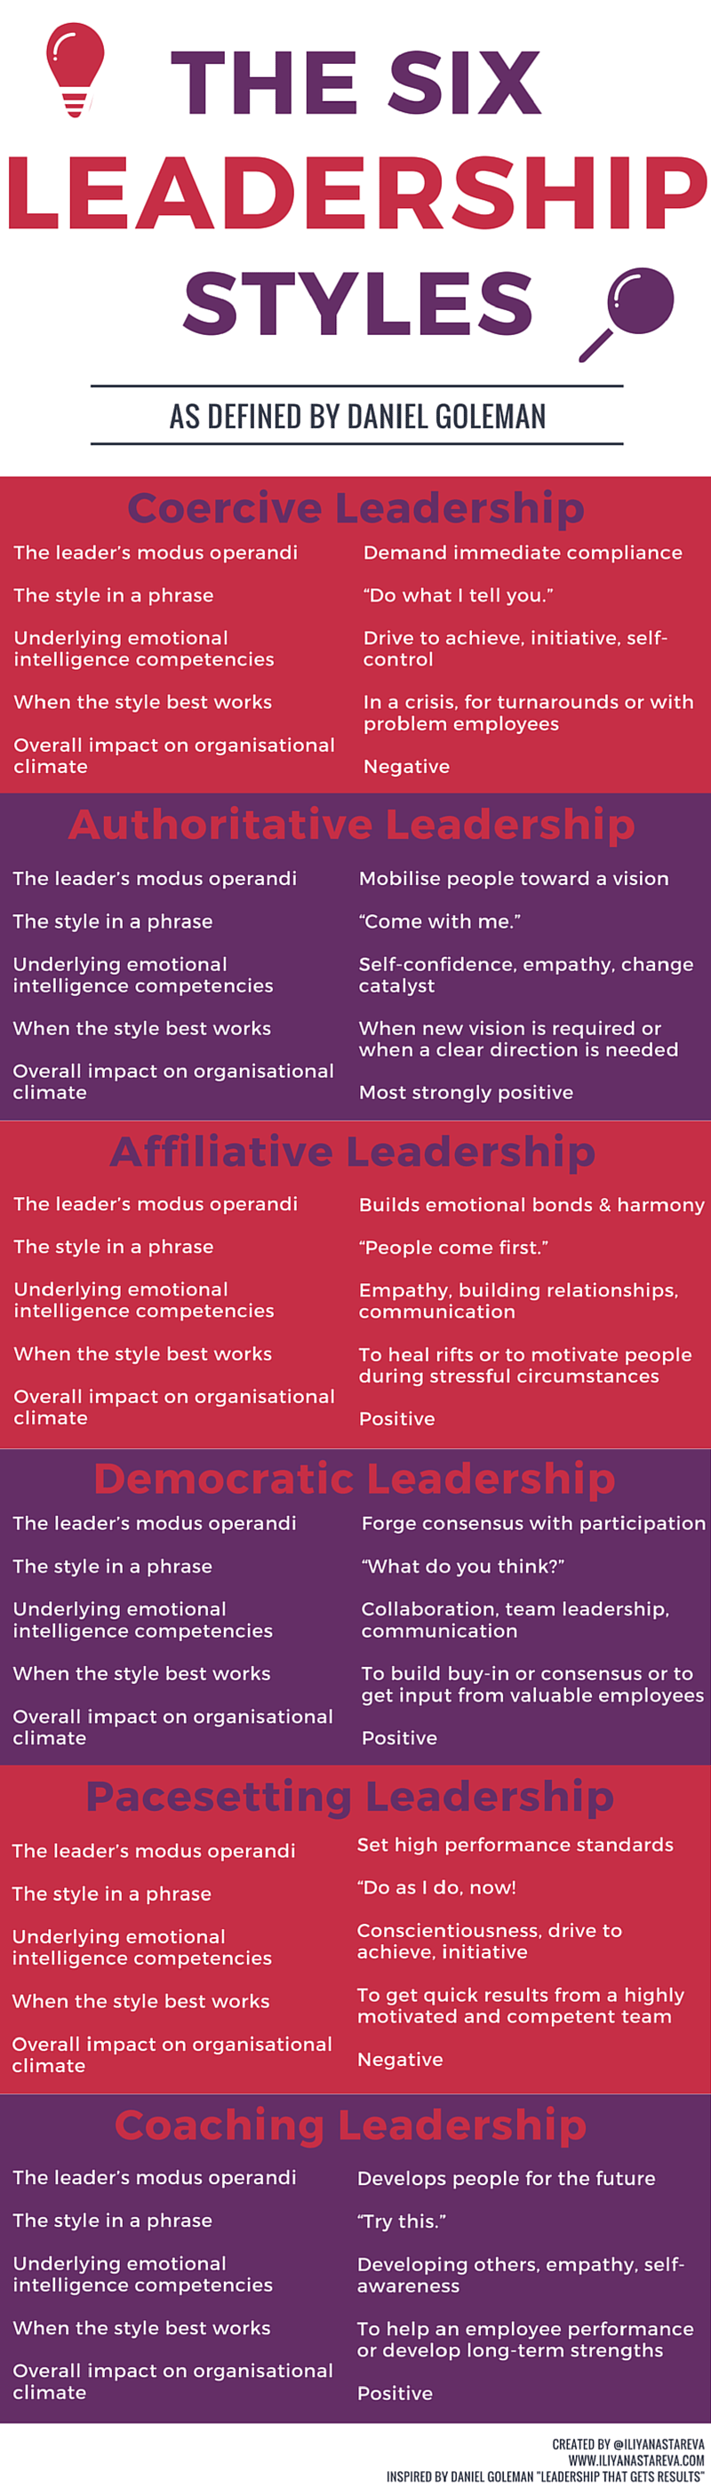 The_Six_Leadership_Styles_Infographic.png